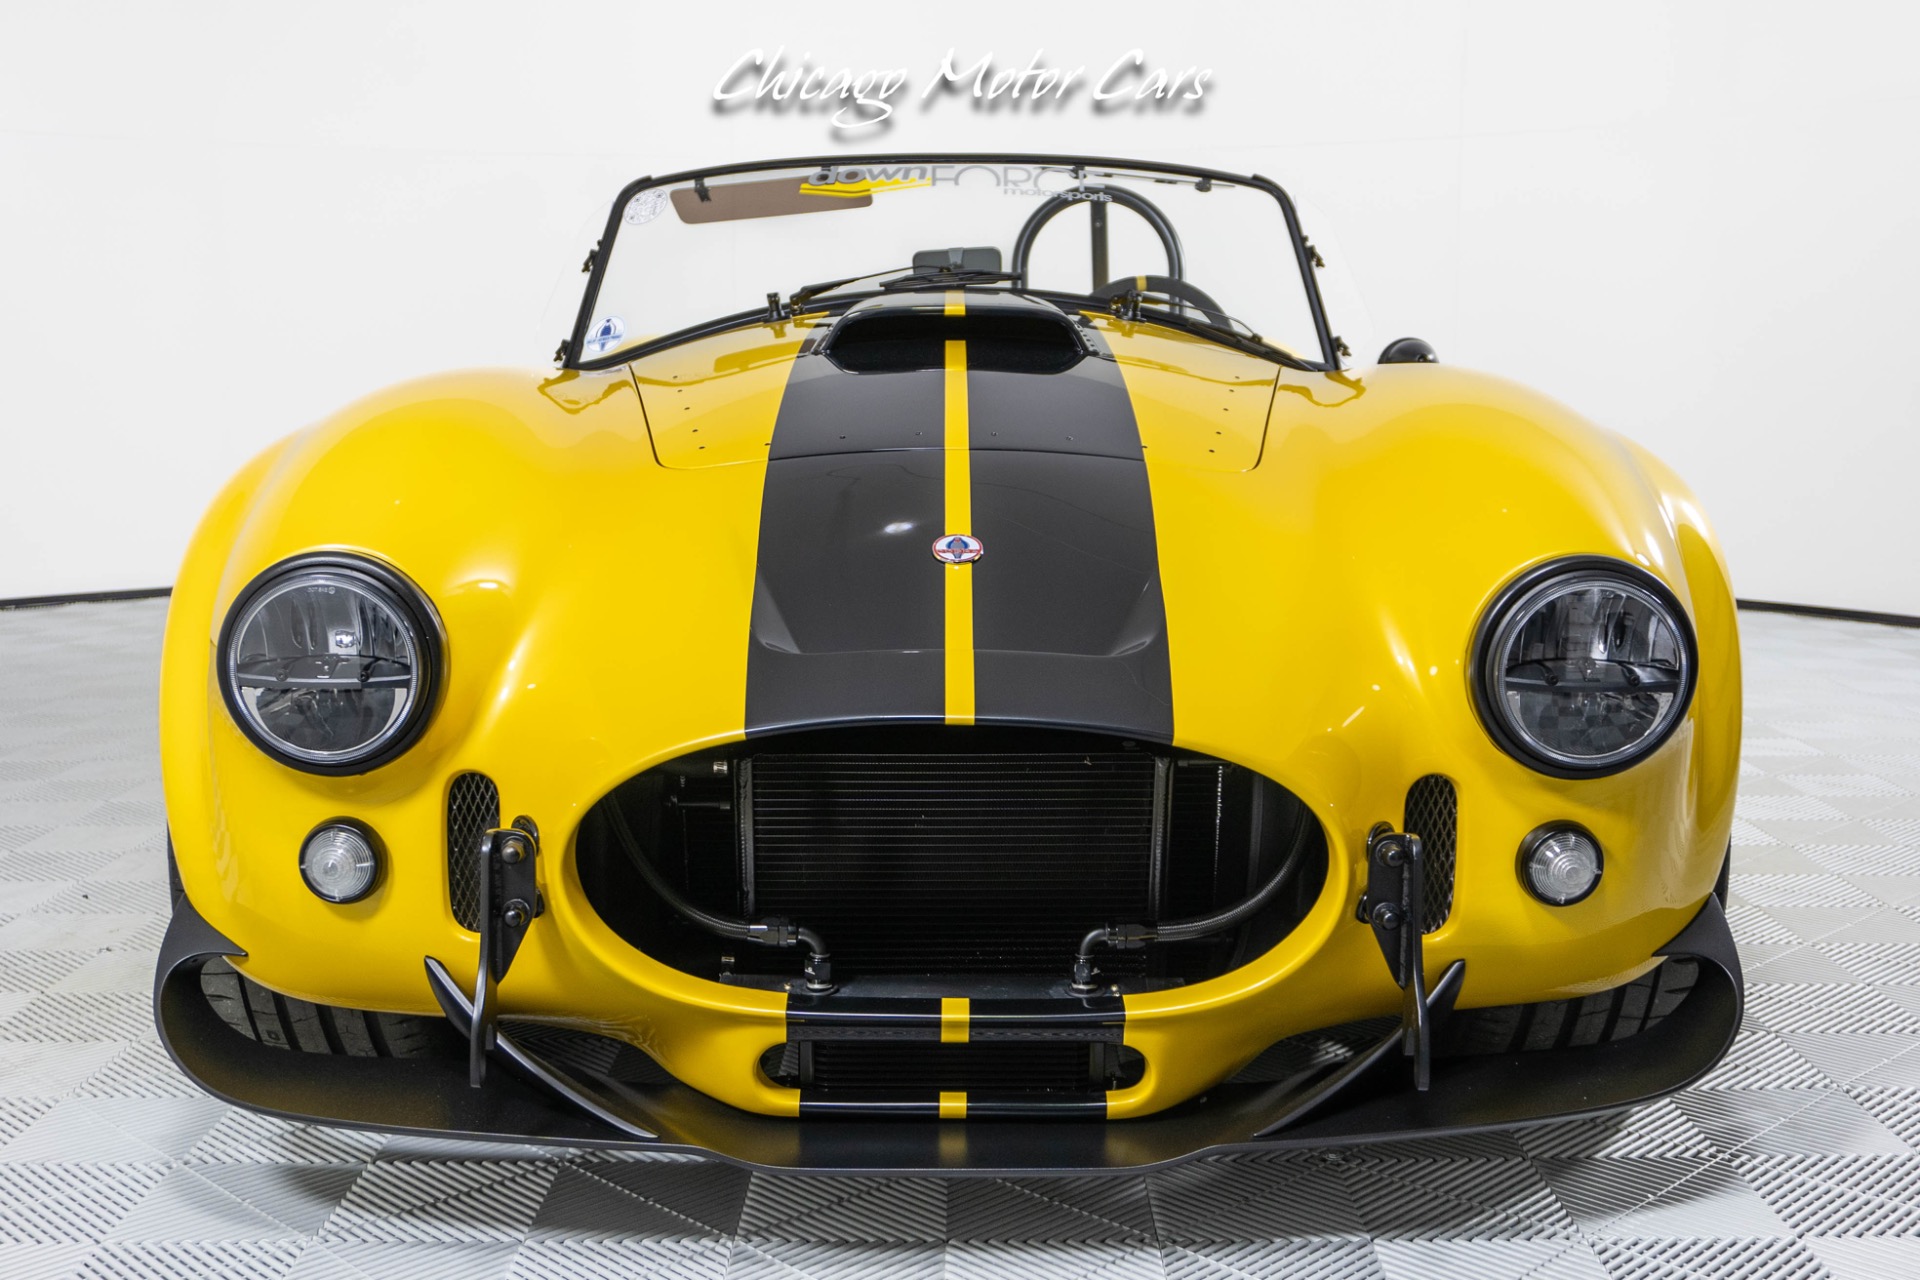 Used-1965-Superformance-MKIII-Cobra-R-Full-Downforce-Performance-Build-52-Supercharged-GT500-Crate-Stunning